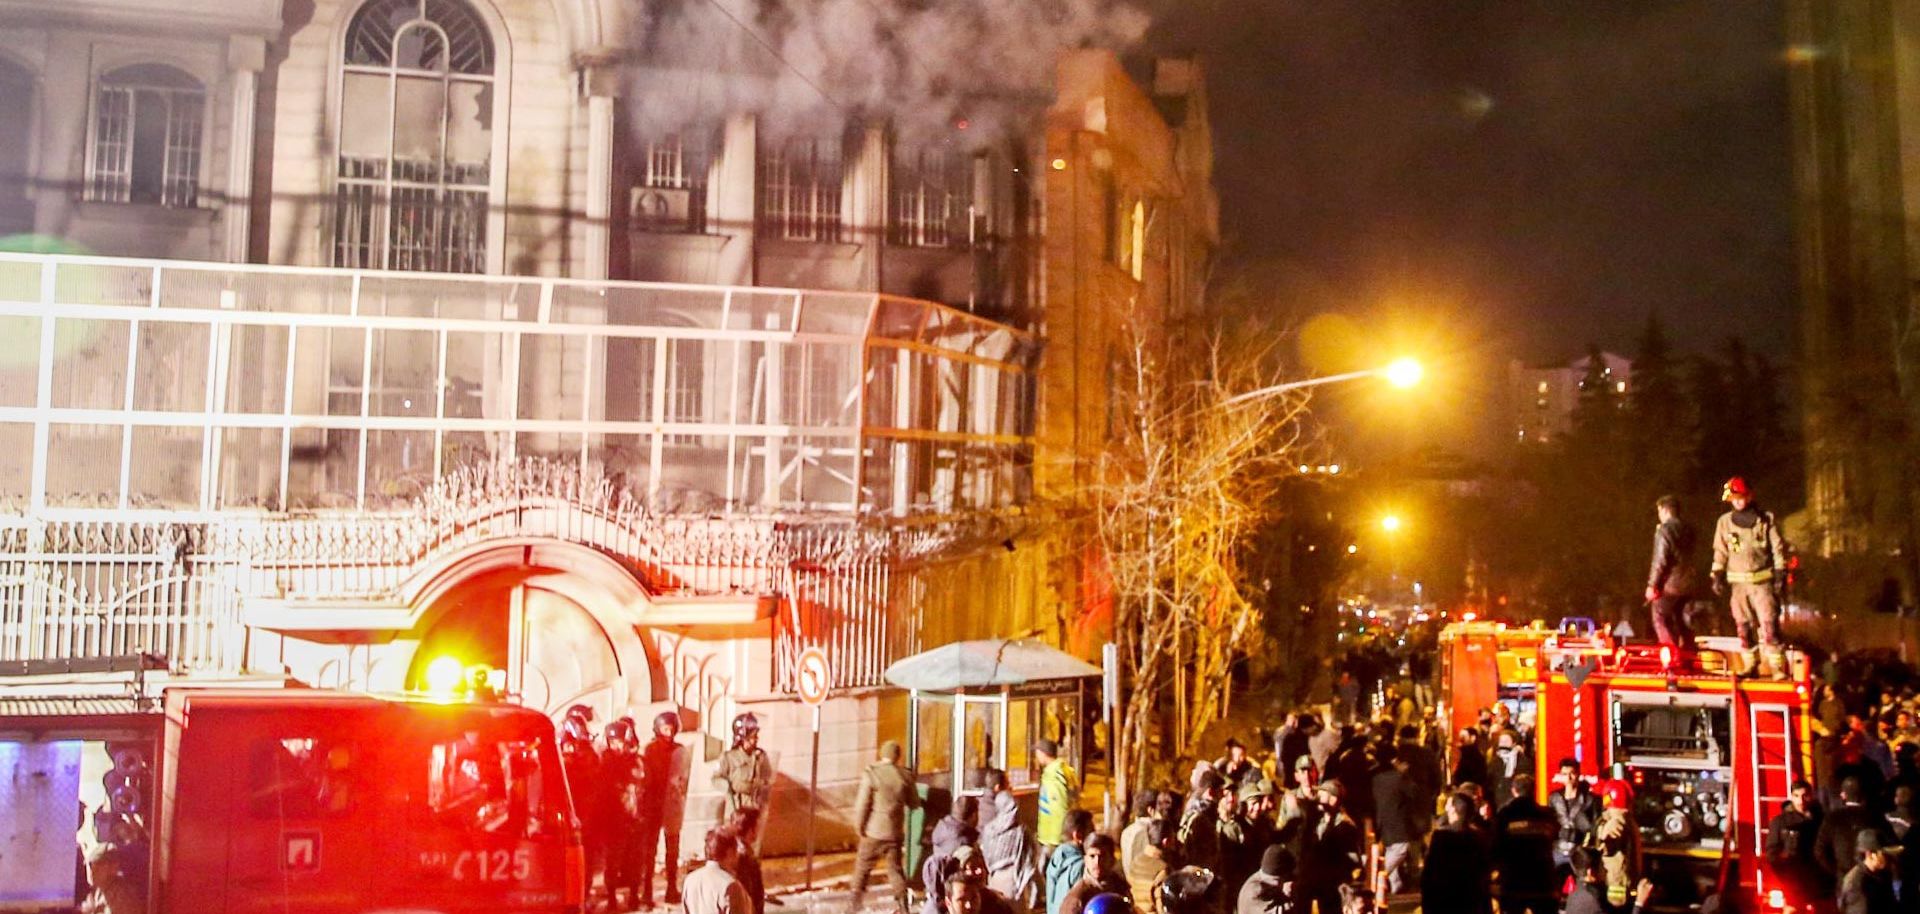 Iranian protesters set fire to the Saudi Embassy in Tehran on Jan. 2 during a demonstration against Saudi authorities' execution of prominent Shiite cleric Nimr al-Nimr.